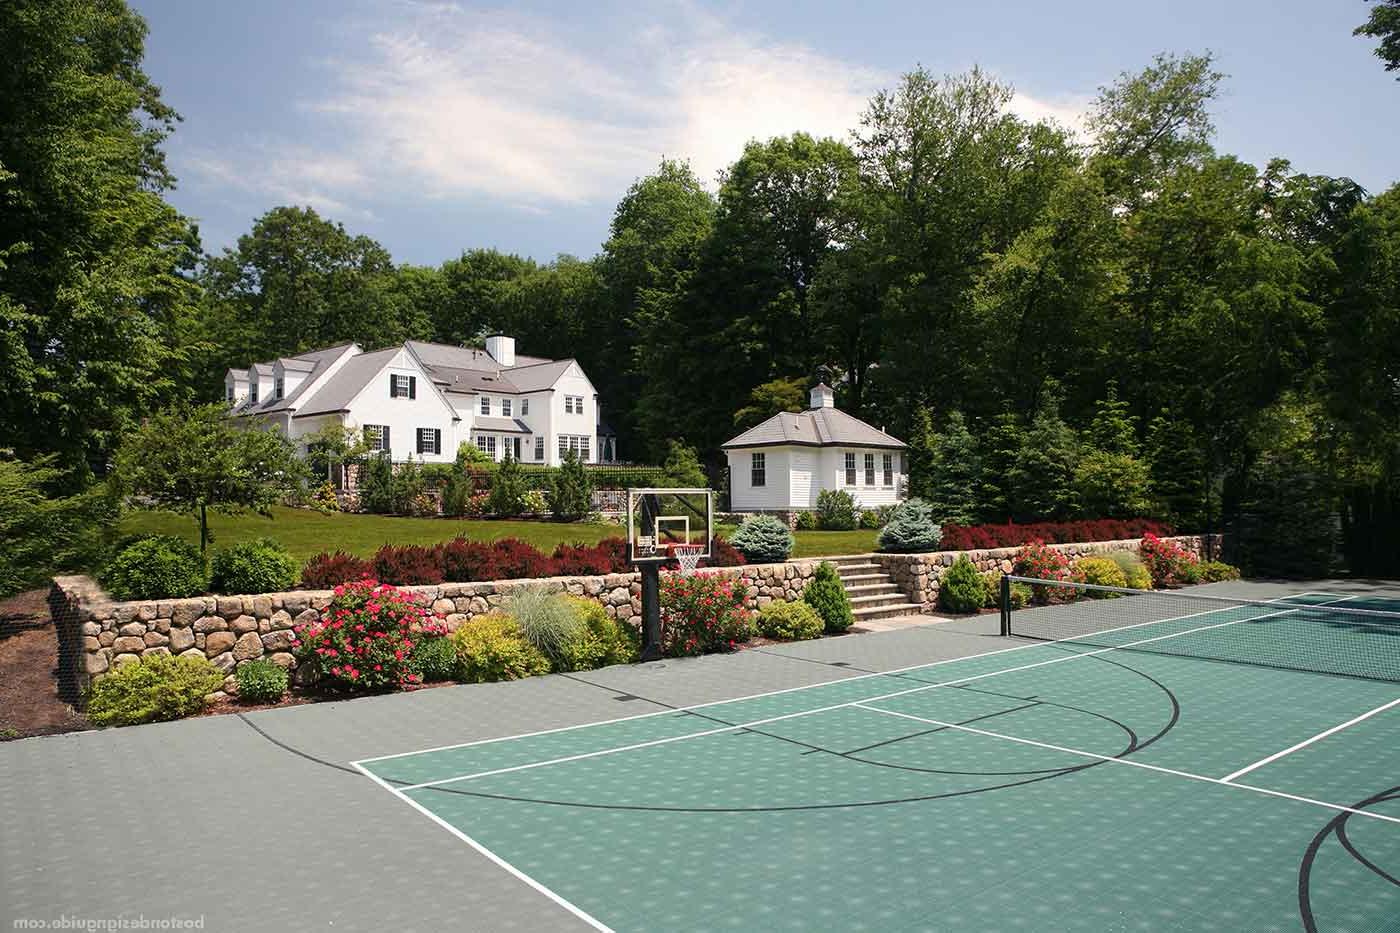 Tennis court design by The MacDowell Company